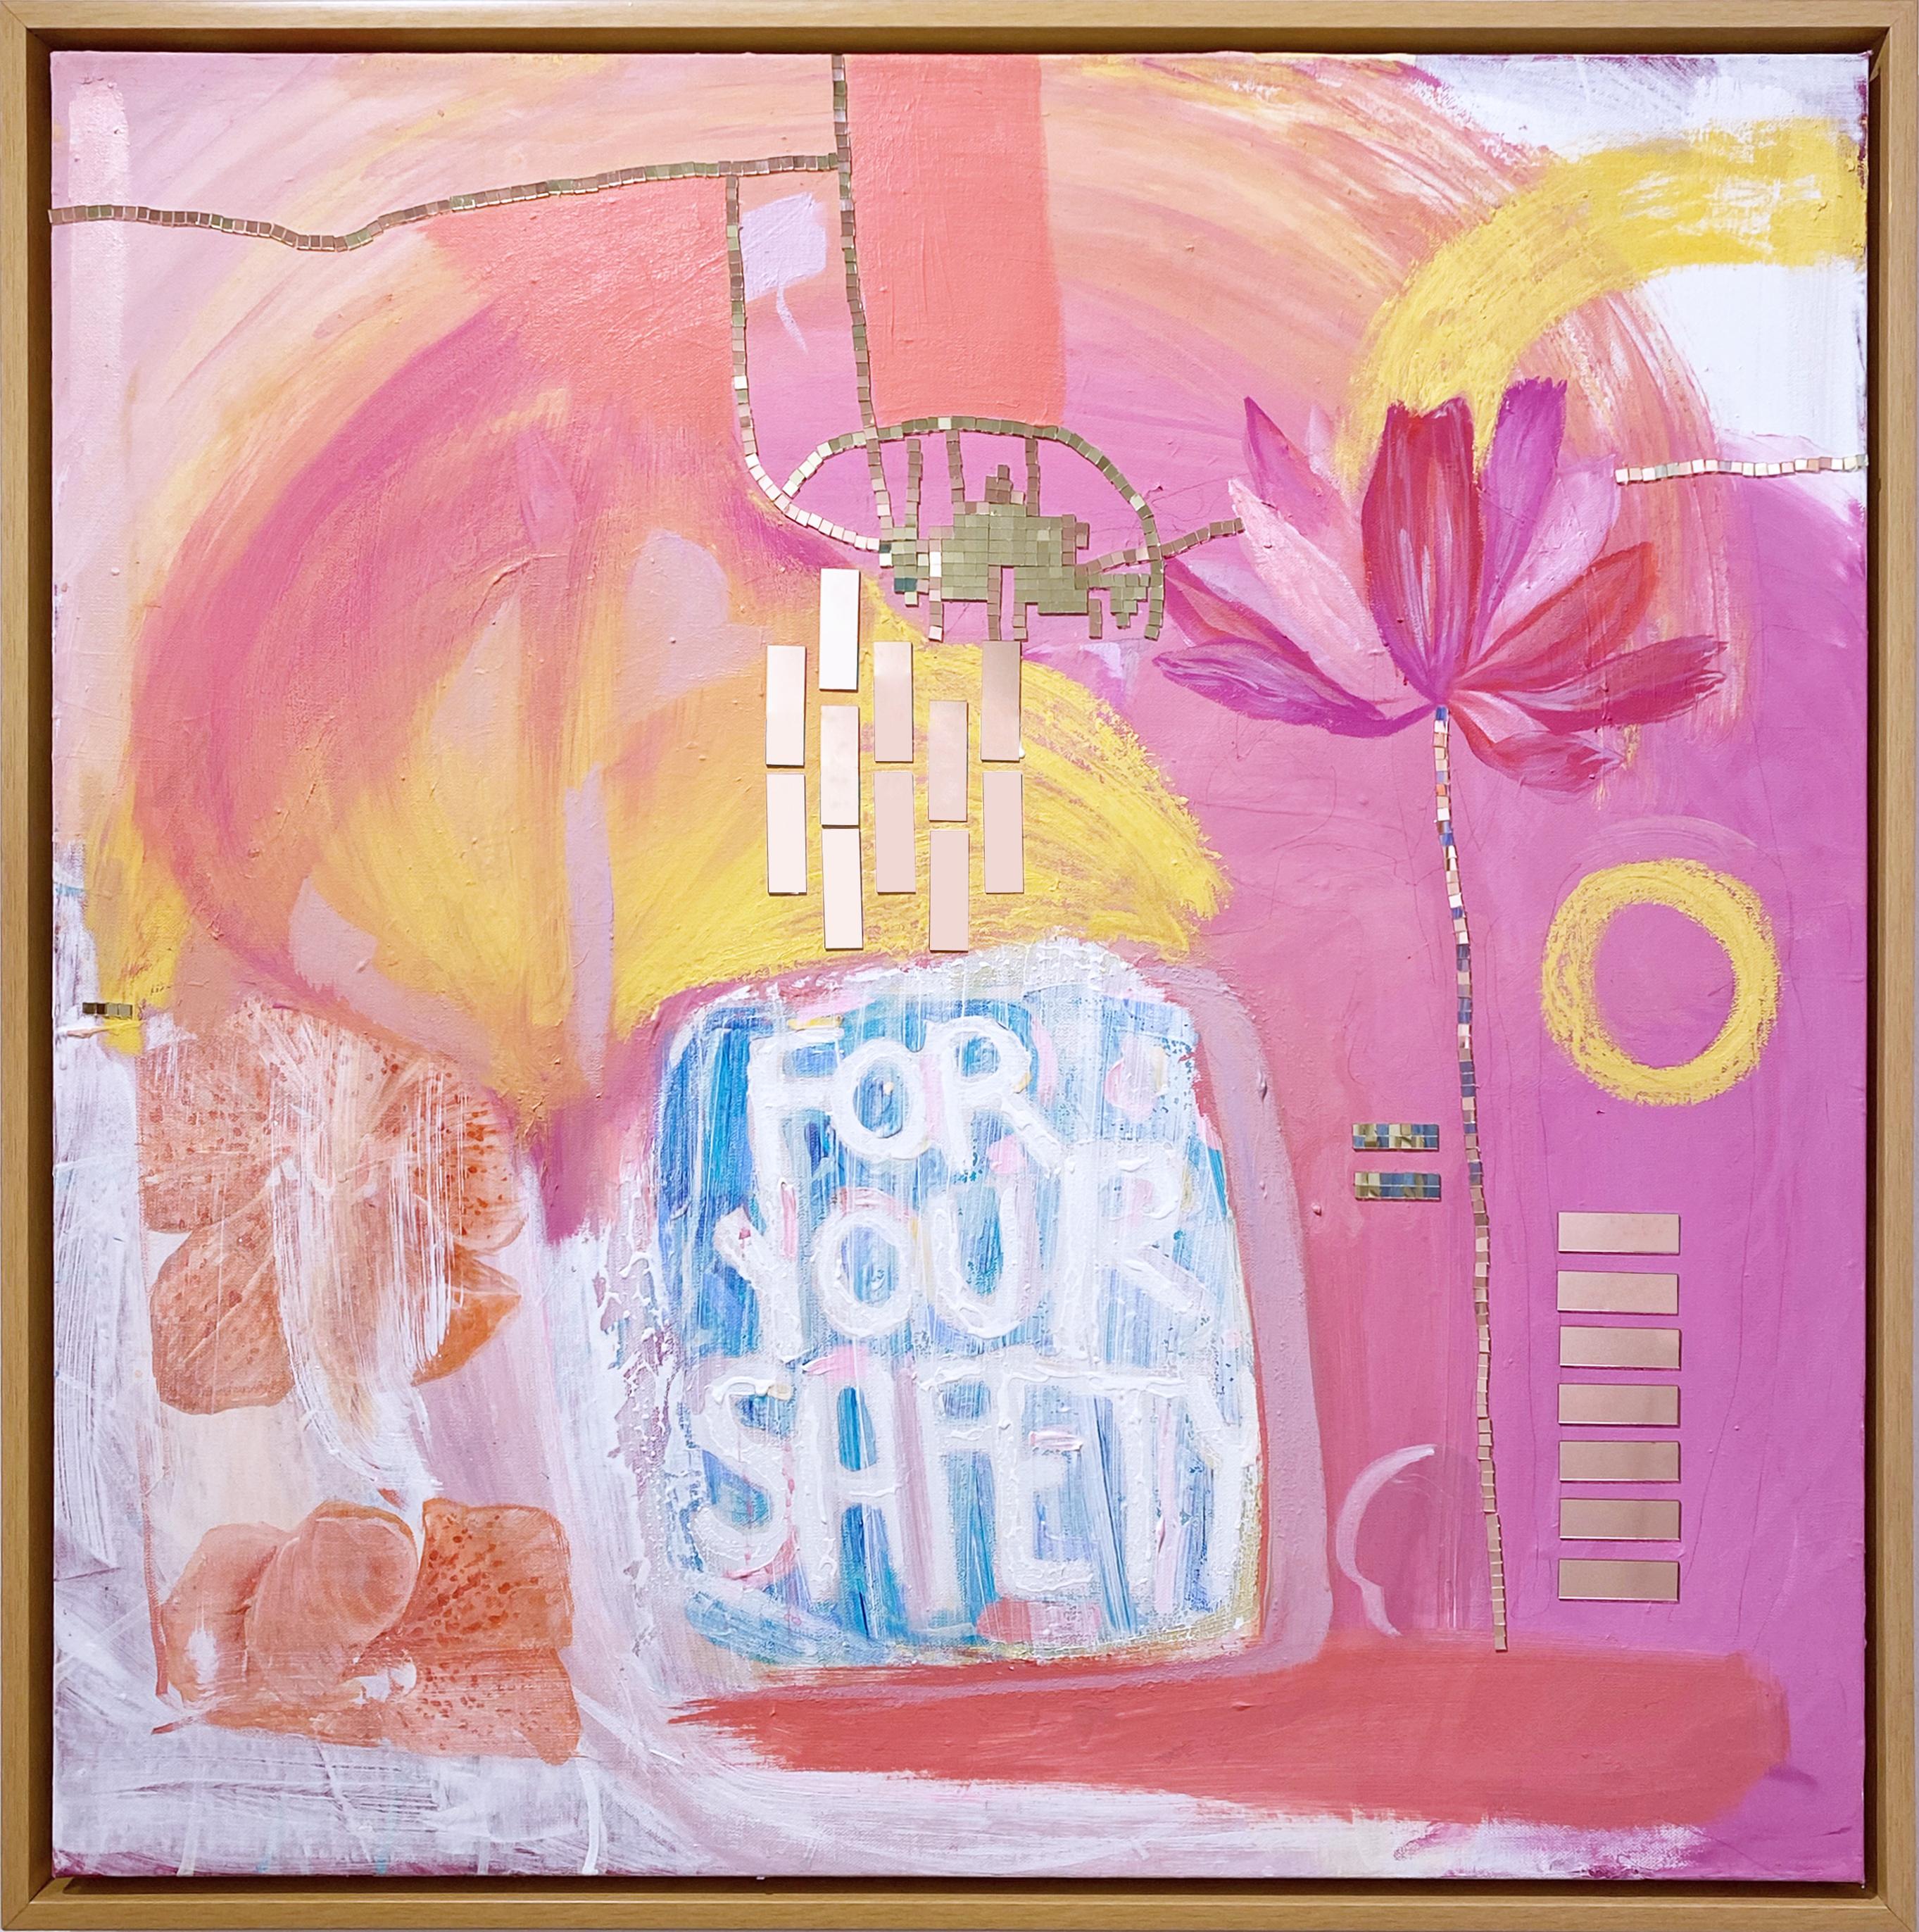 Eat Fruit, 2020, pink, orange, acrylic, lime wash on linen, text, floral, mirror